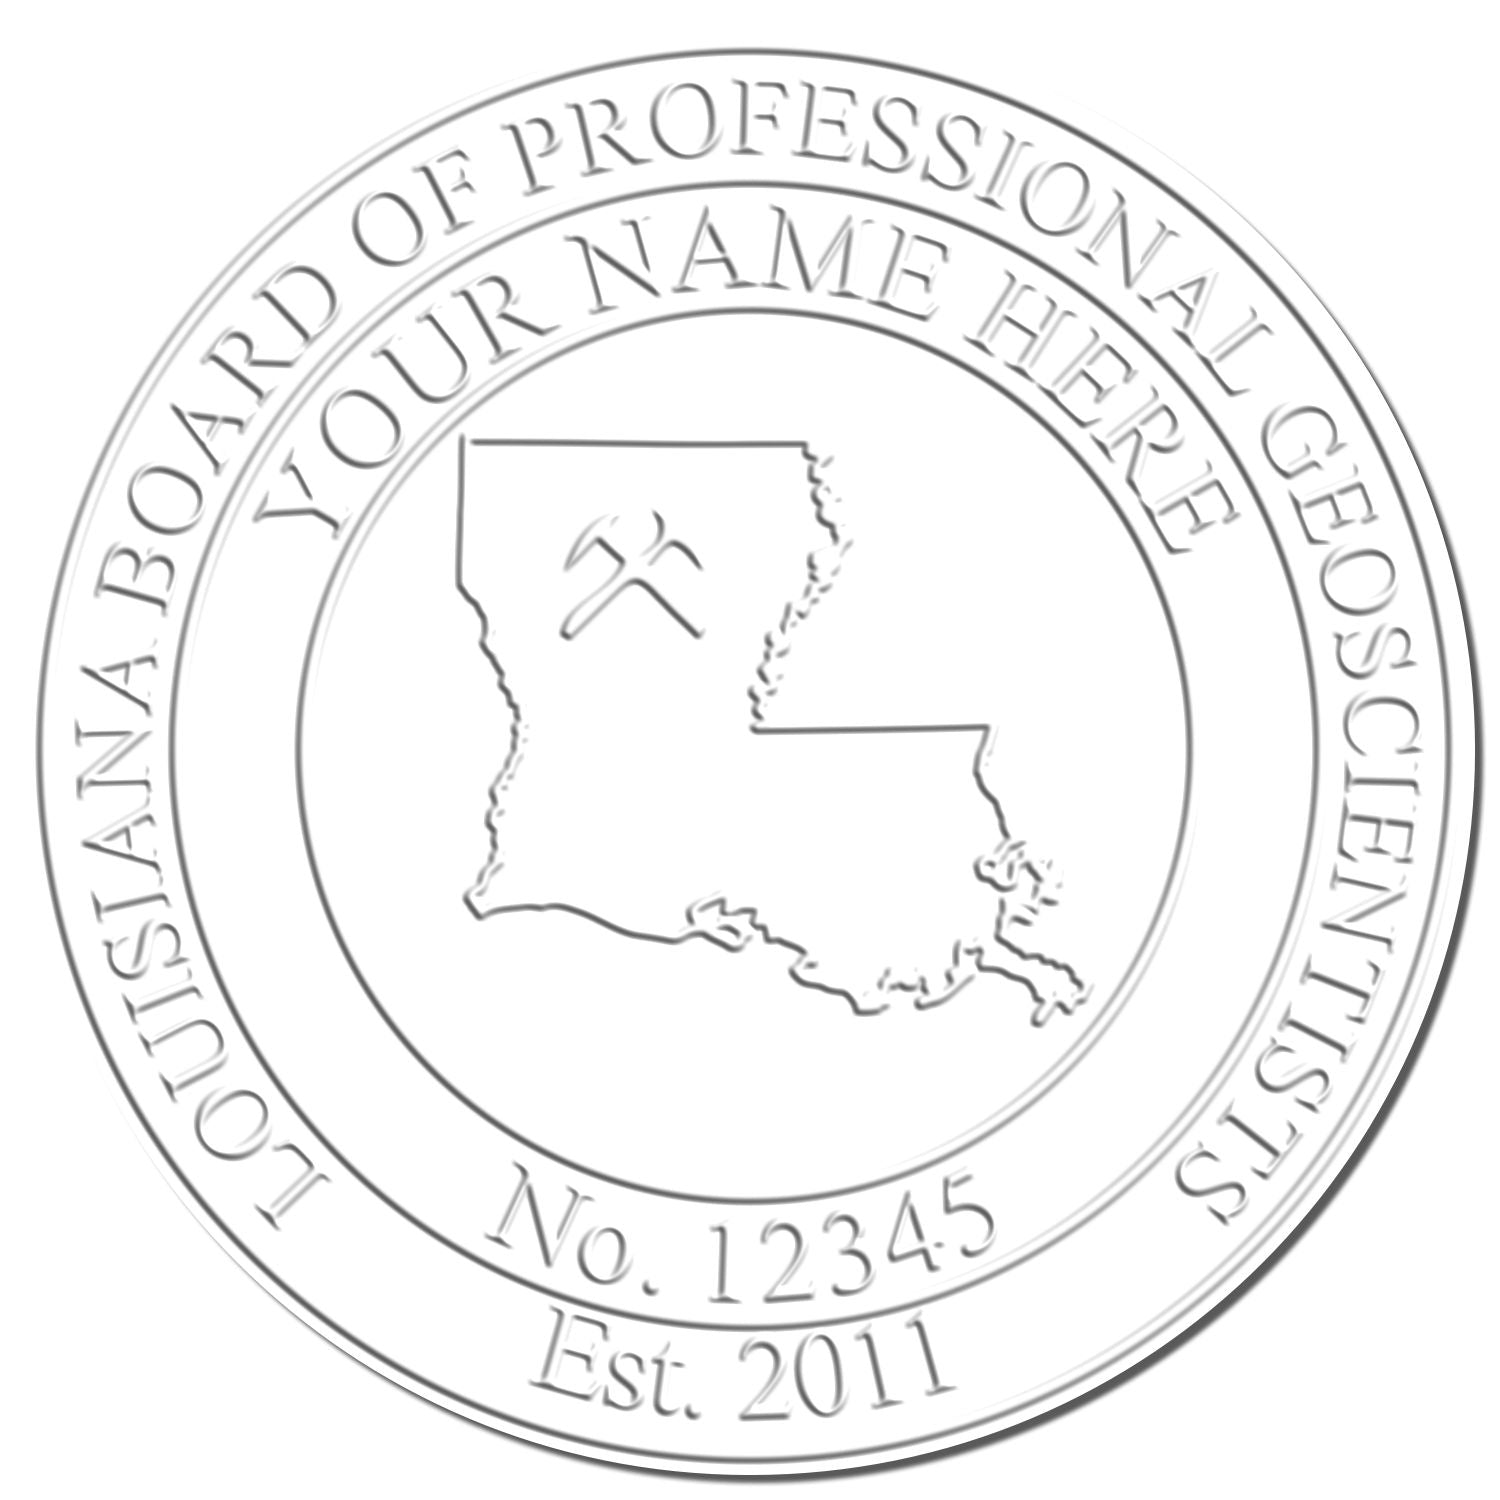 The main image for the Louisiana Geologist Desk Seal depicting a sample of the imprint and imprint sample